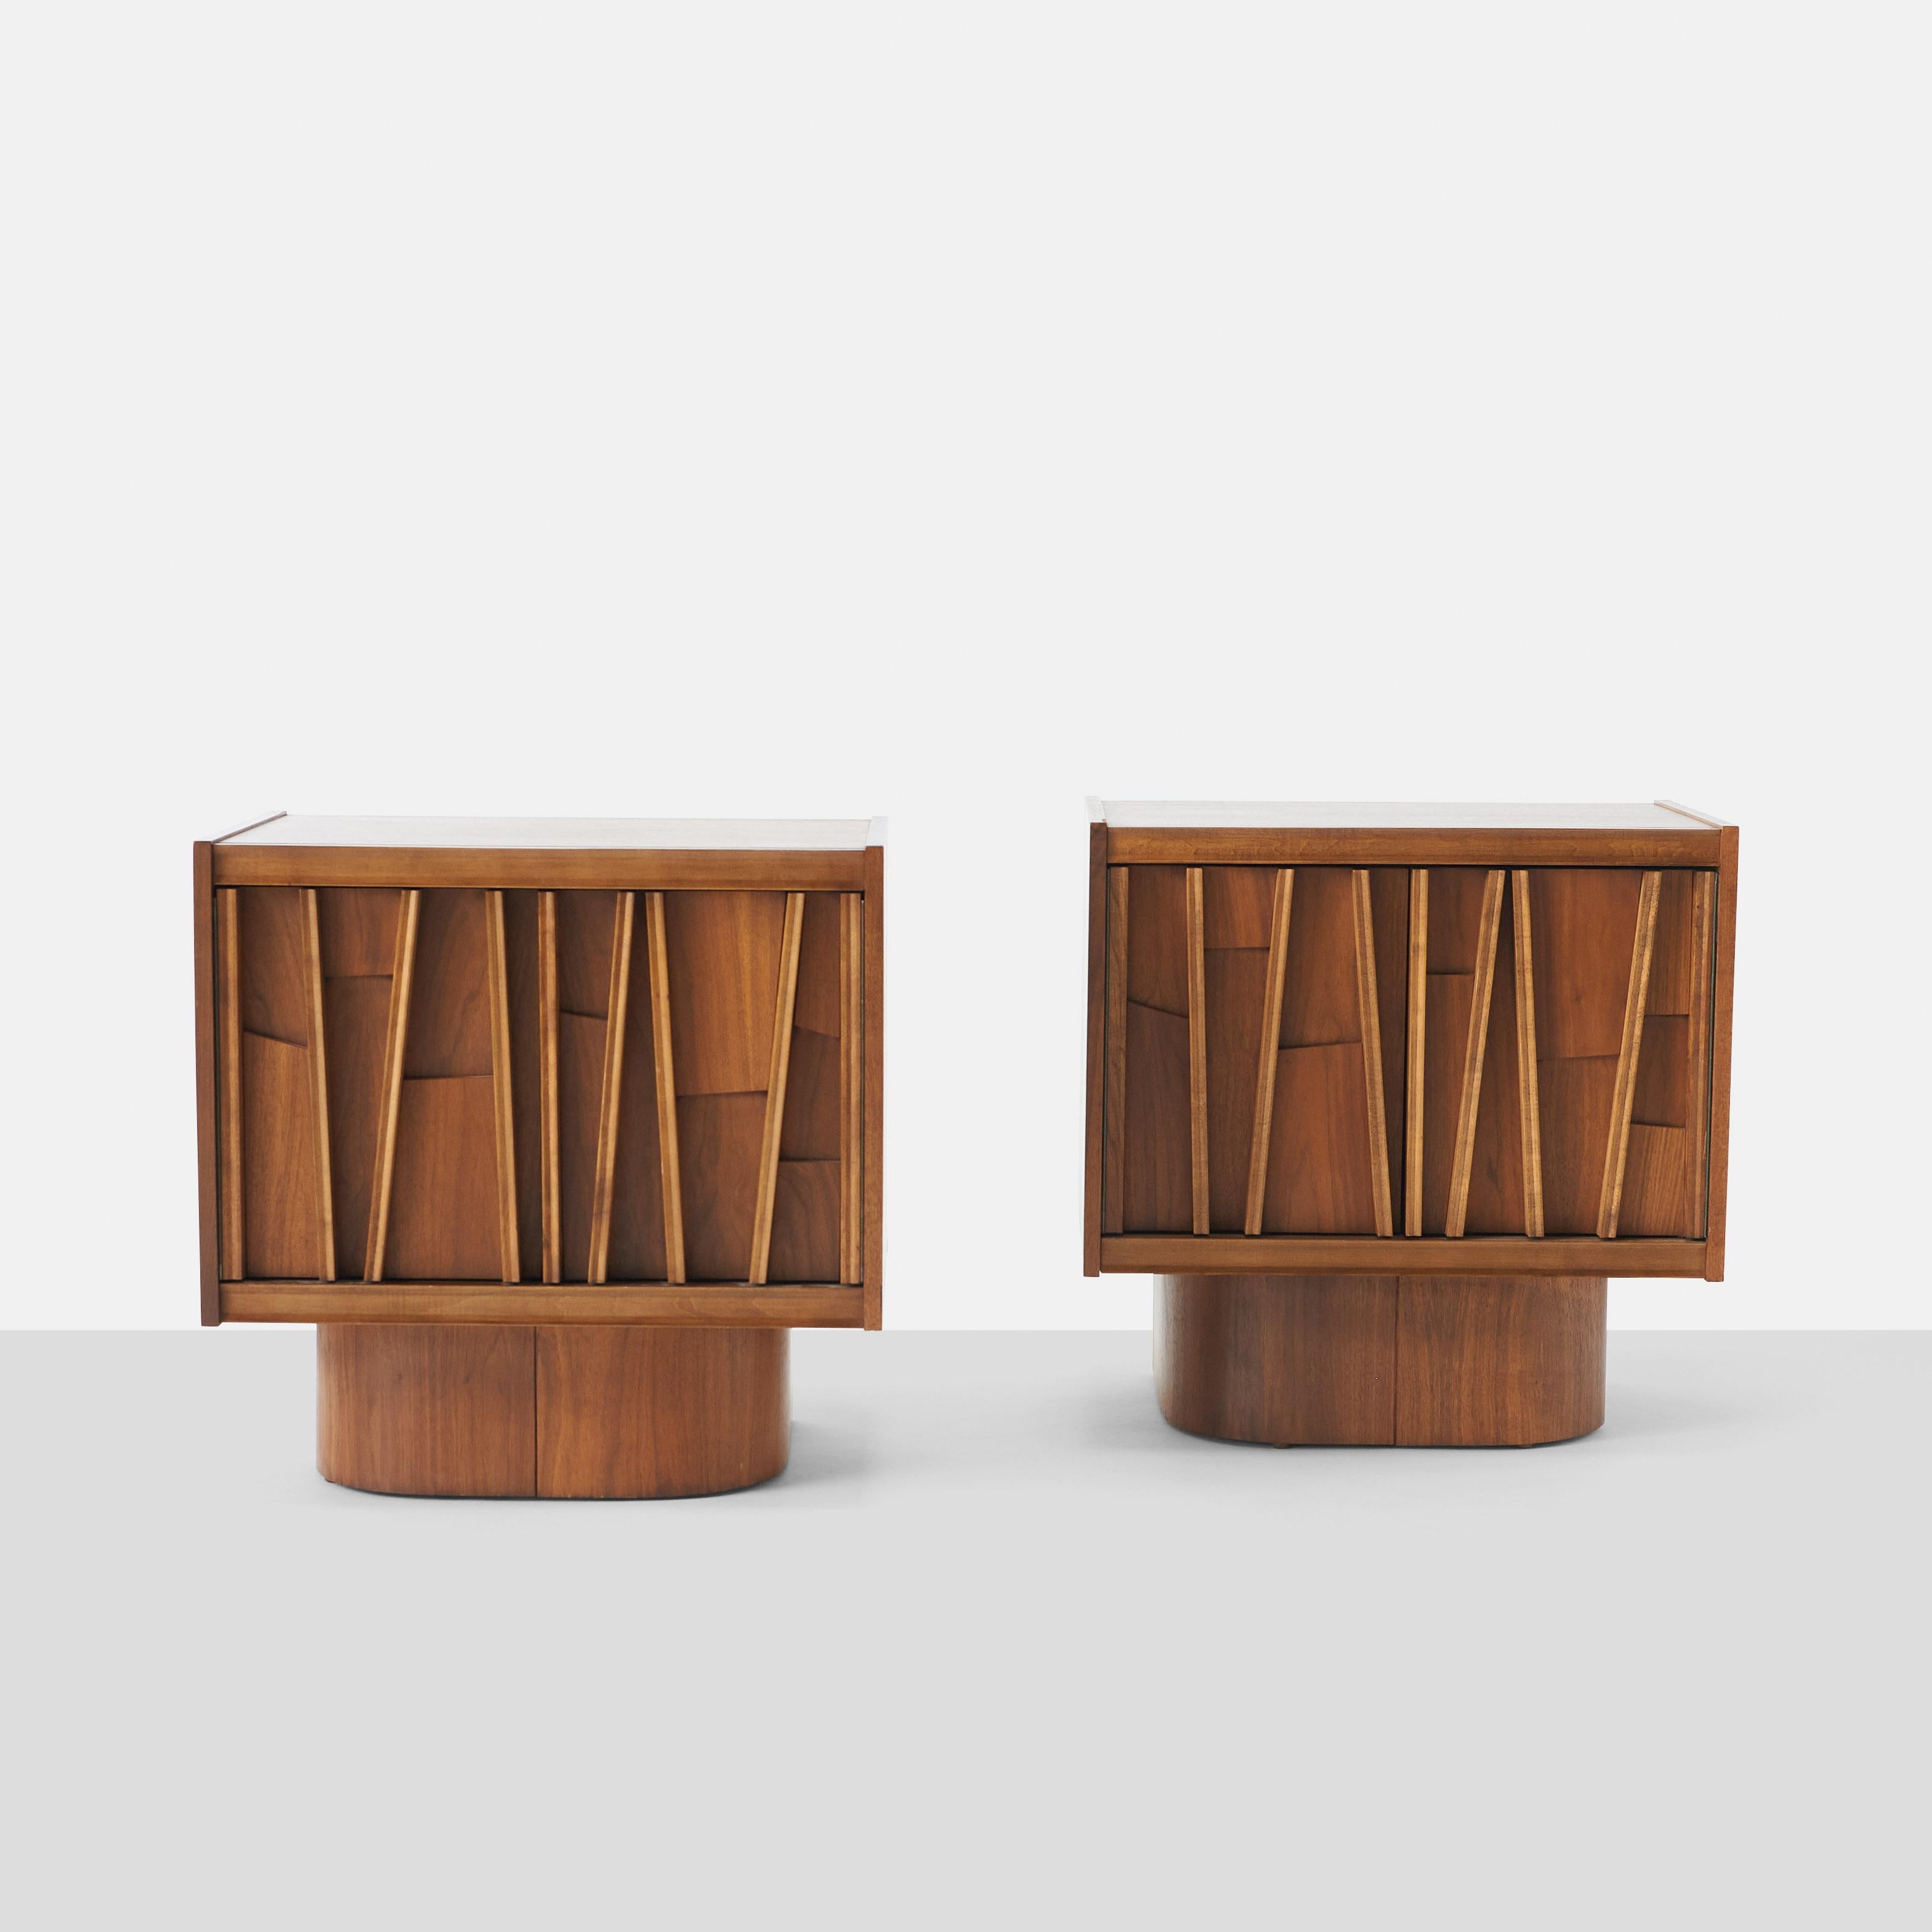 A pair of brutalist night stands or side tables of walnut. Swing out cabinet doors with shelving and pedestal base.

